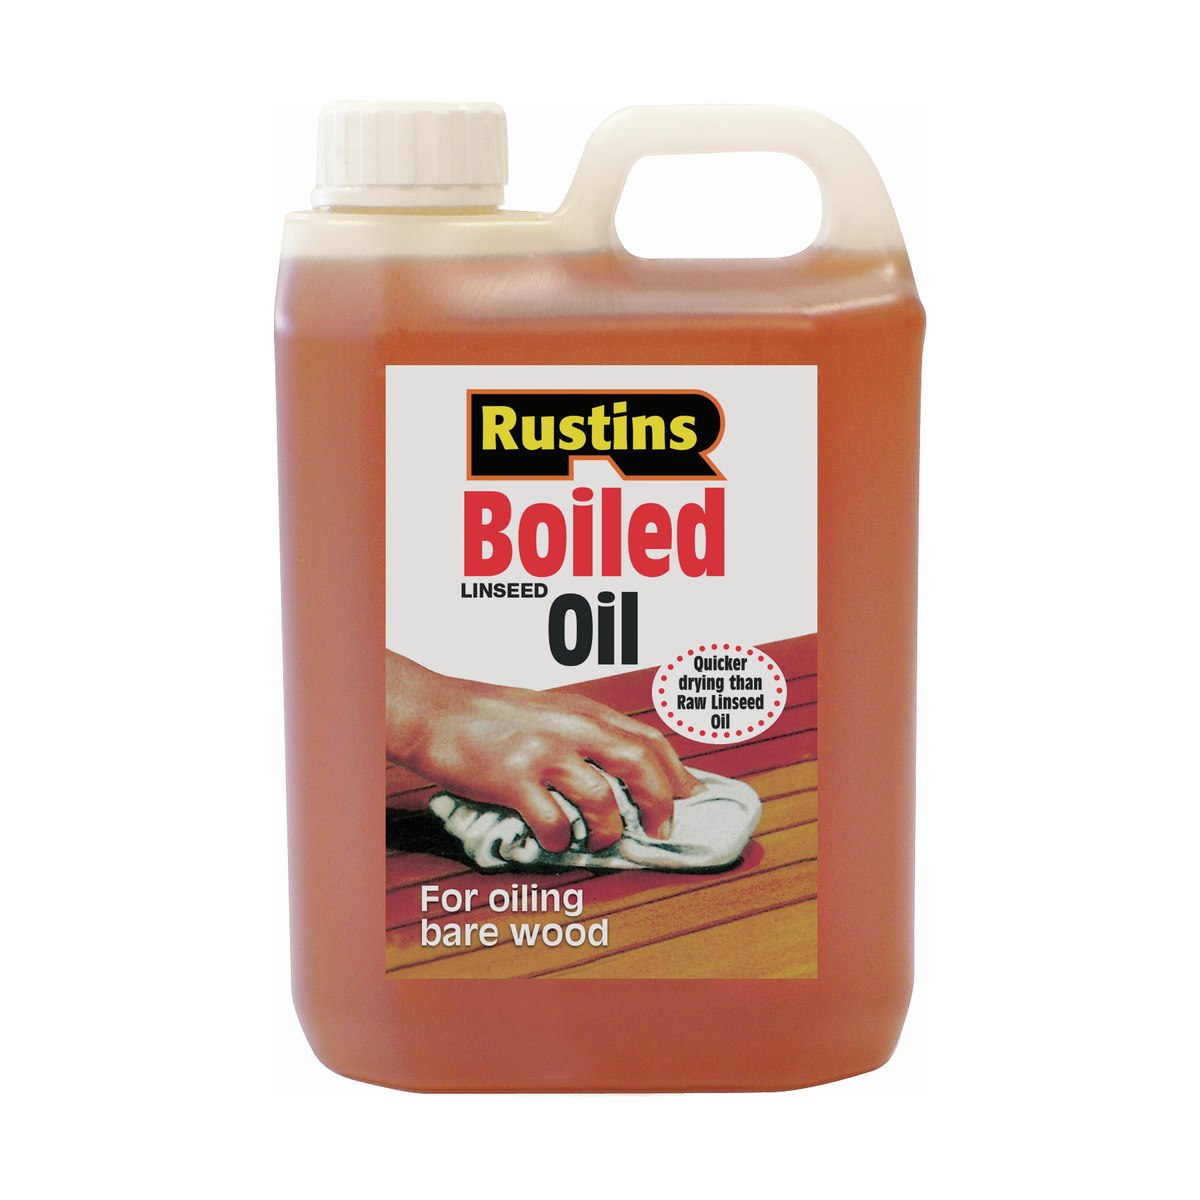 Rustins Boiled Linseed Oil 2 Litre